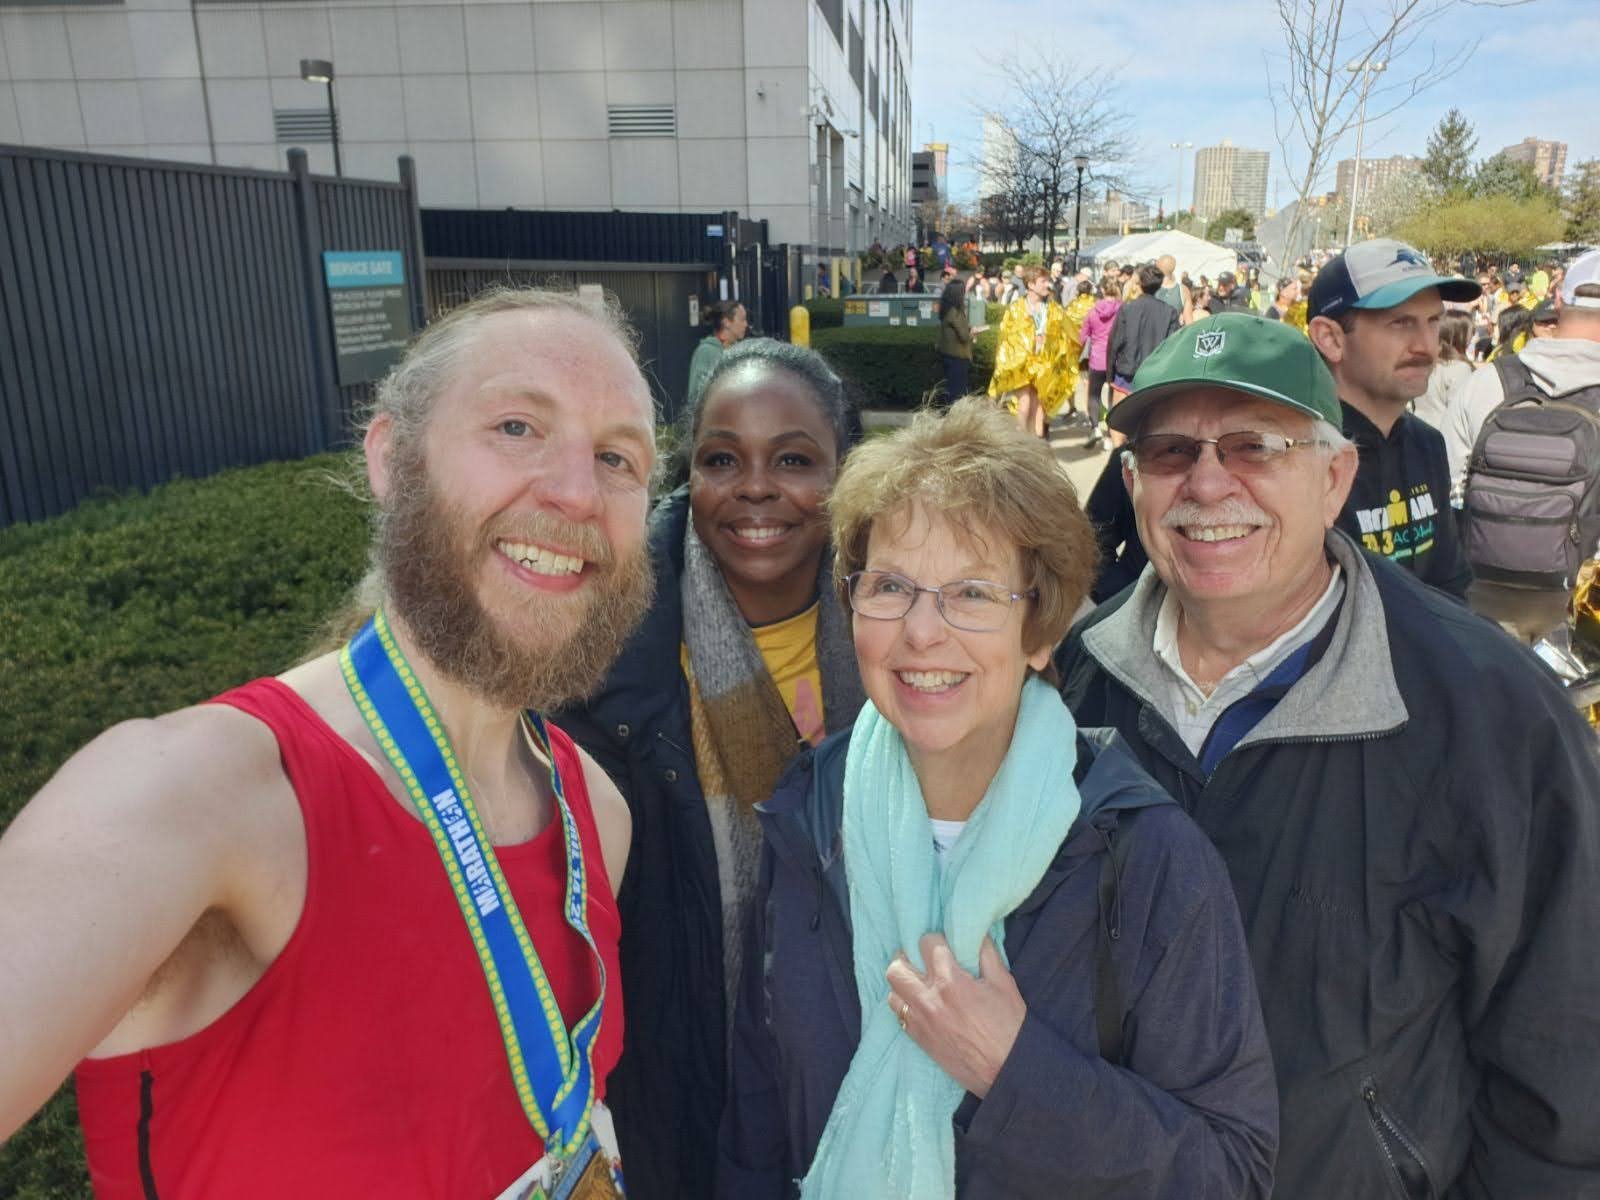 Me with my family at the finish line of the Jersey City Marathon.